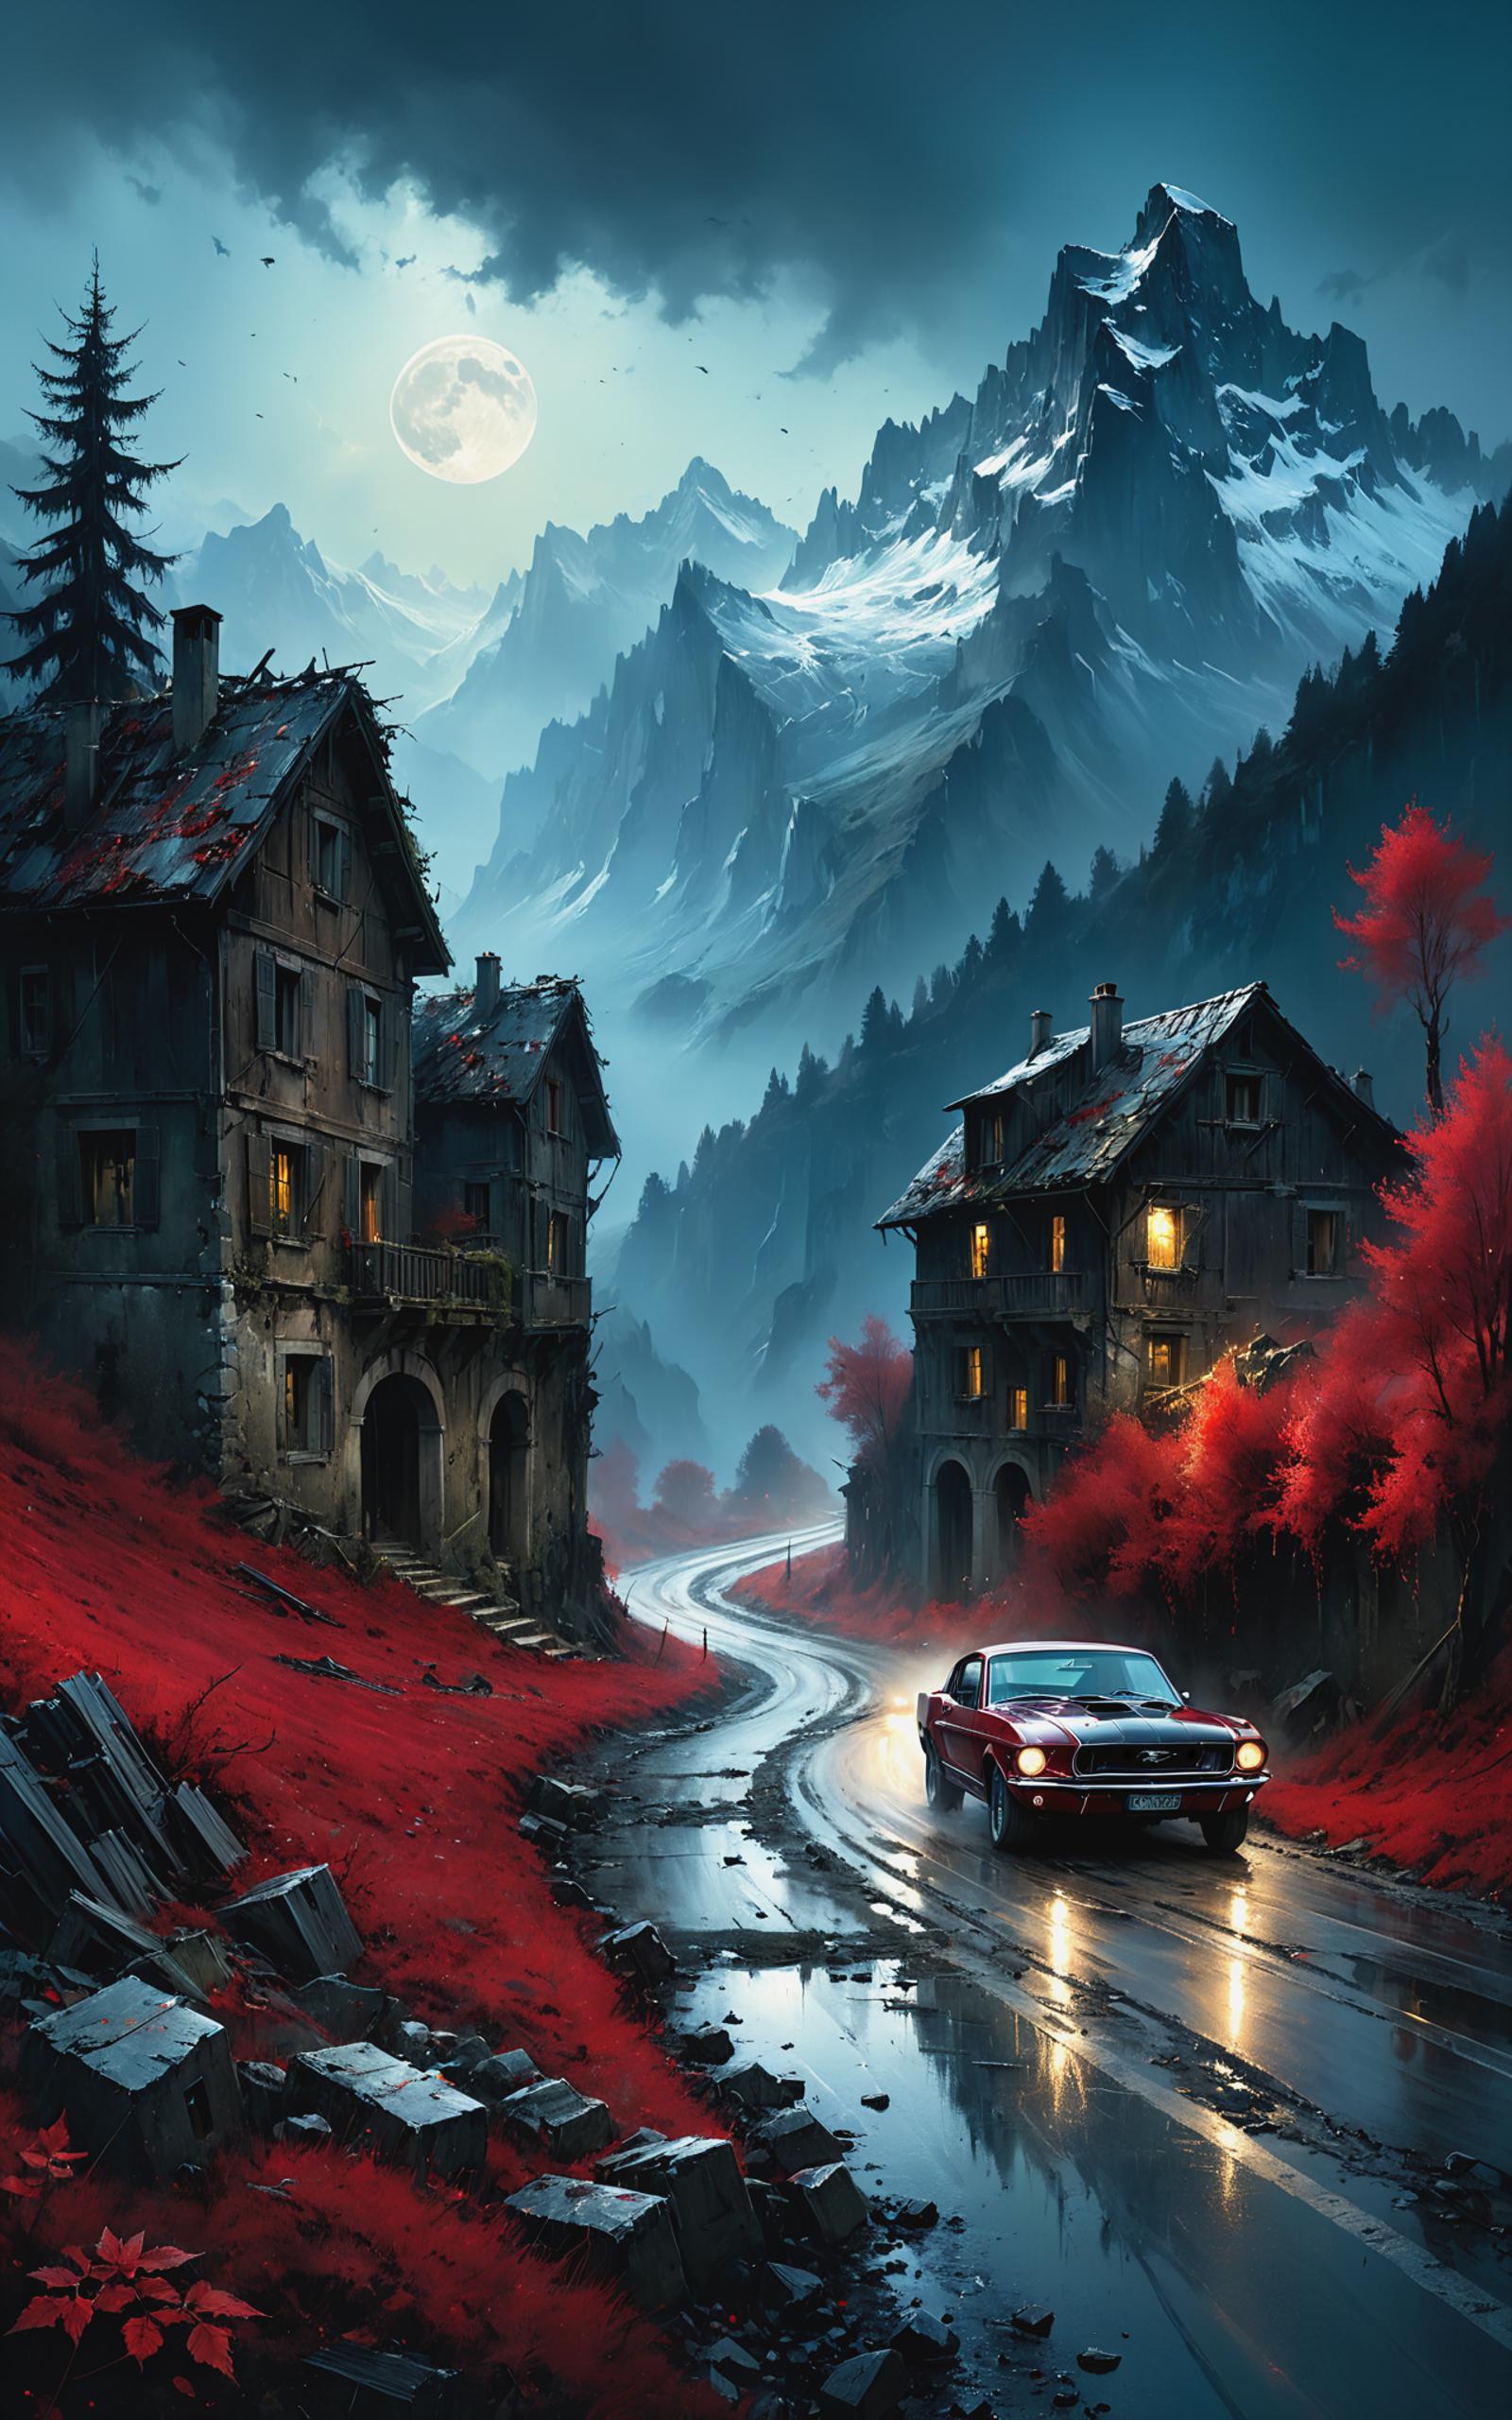 A painting of a car driving down a road in a mountainous area at night.